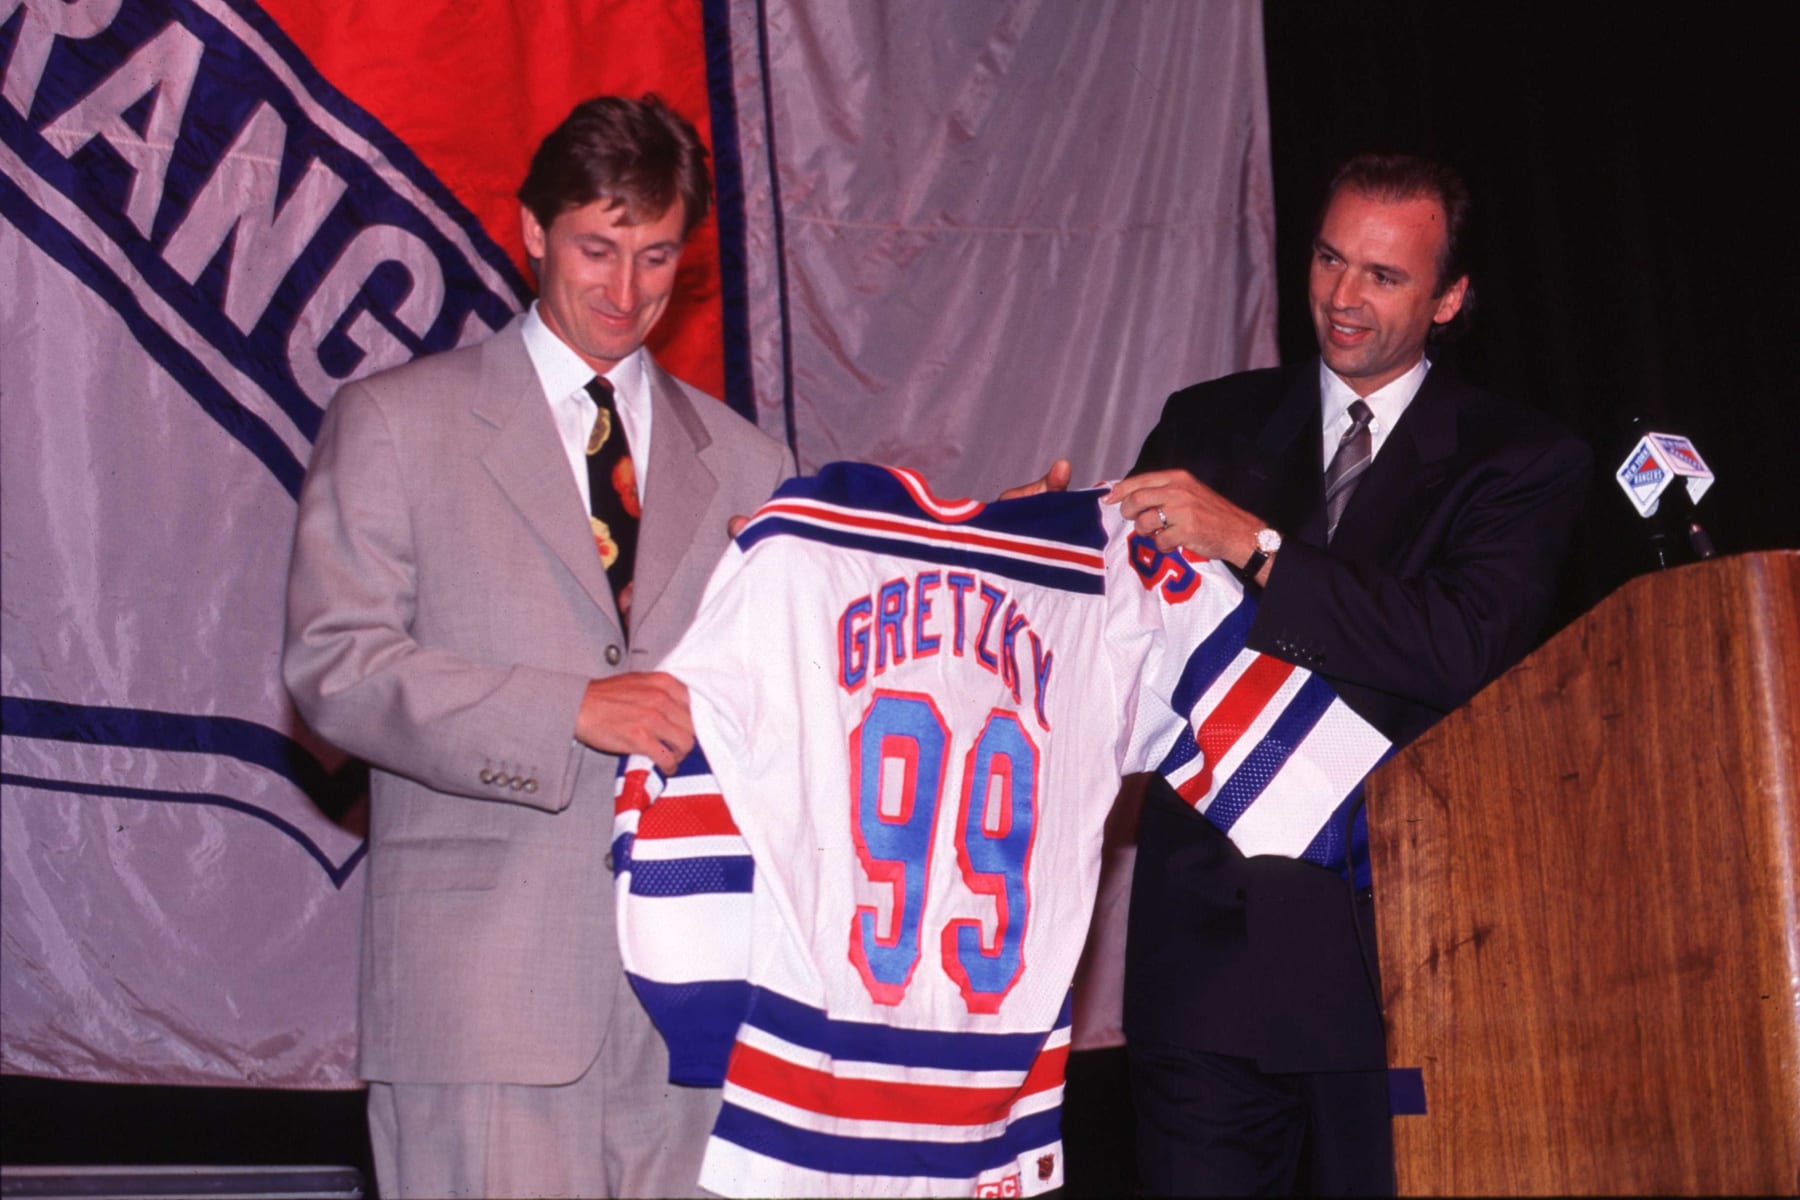 Wayne Gretzky final game Rangers jersey up for auction